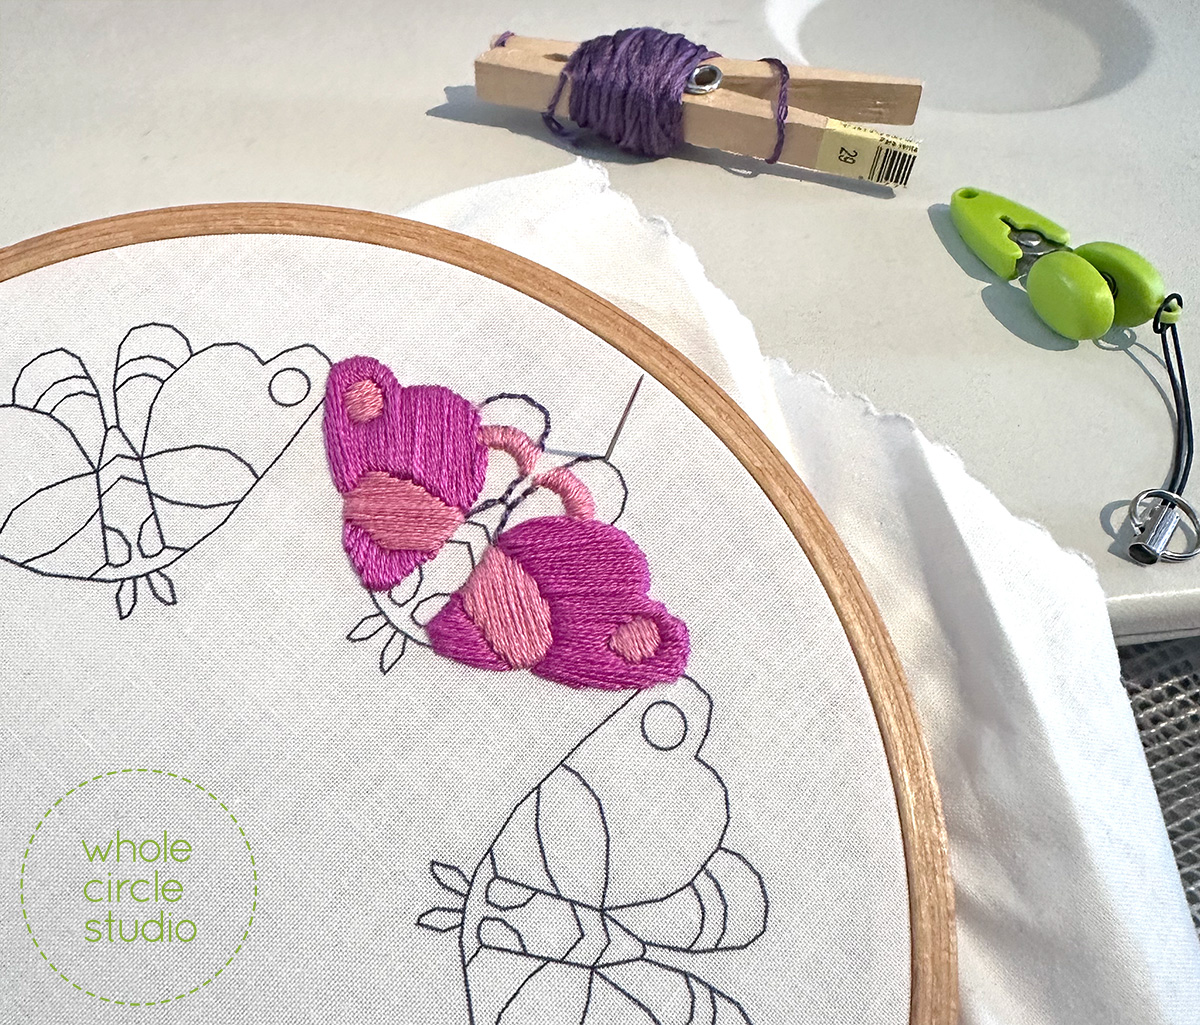 embroidery of colorful moths in progress